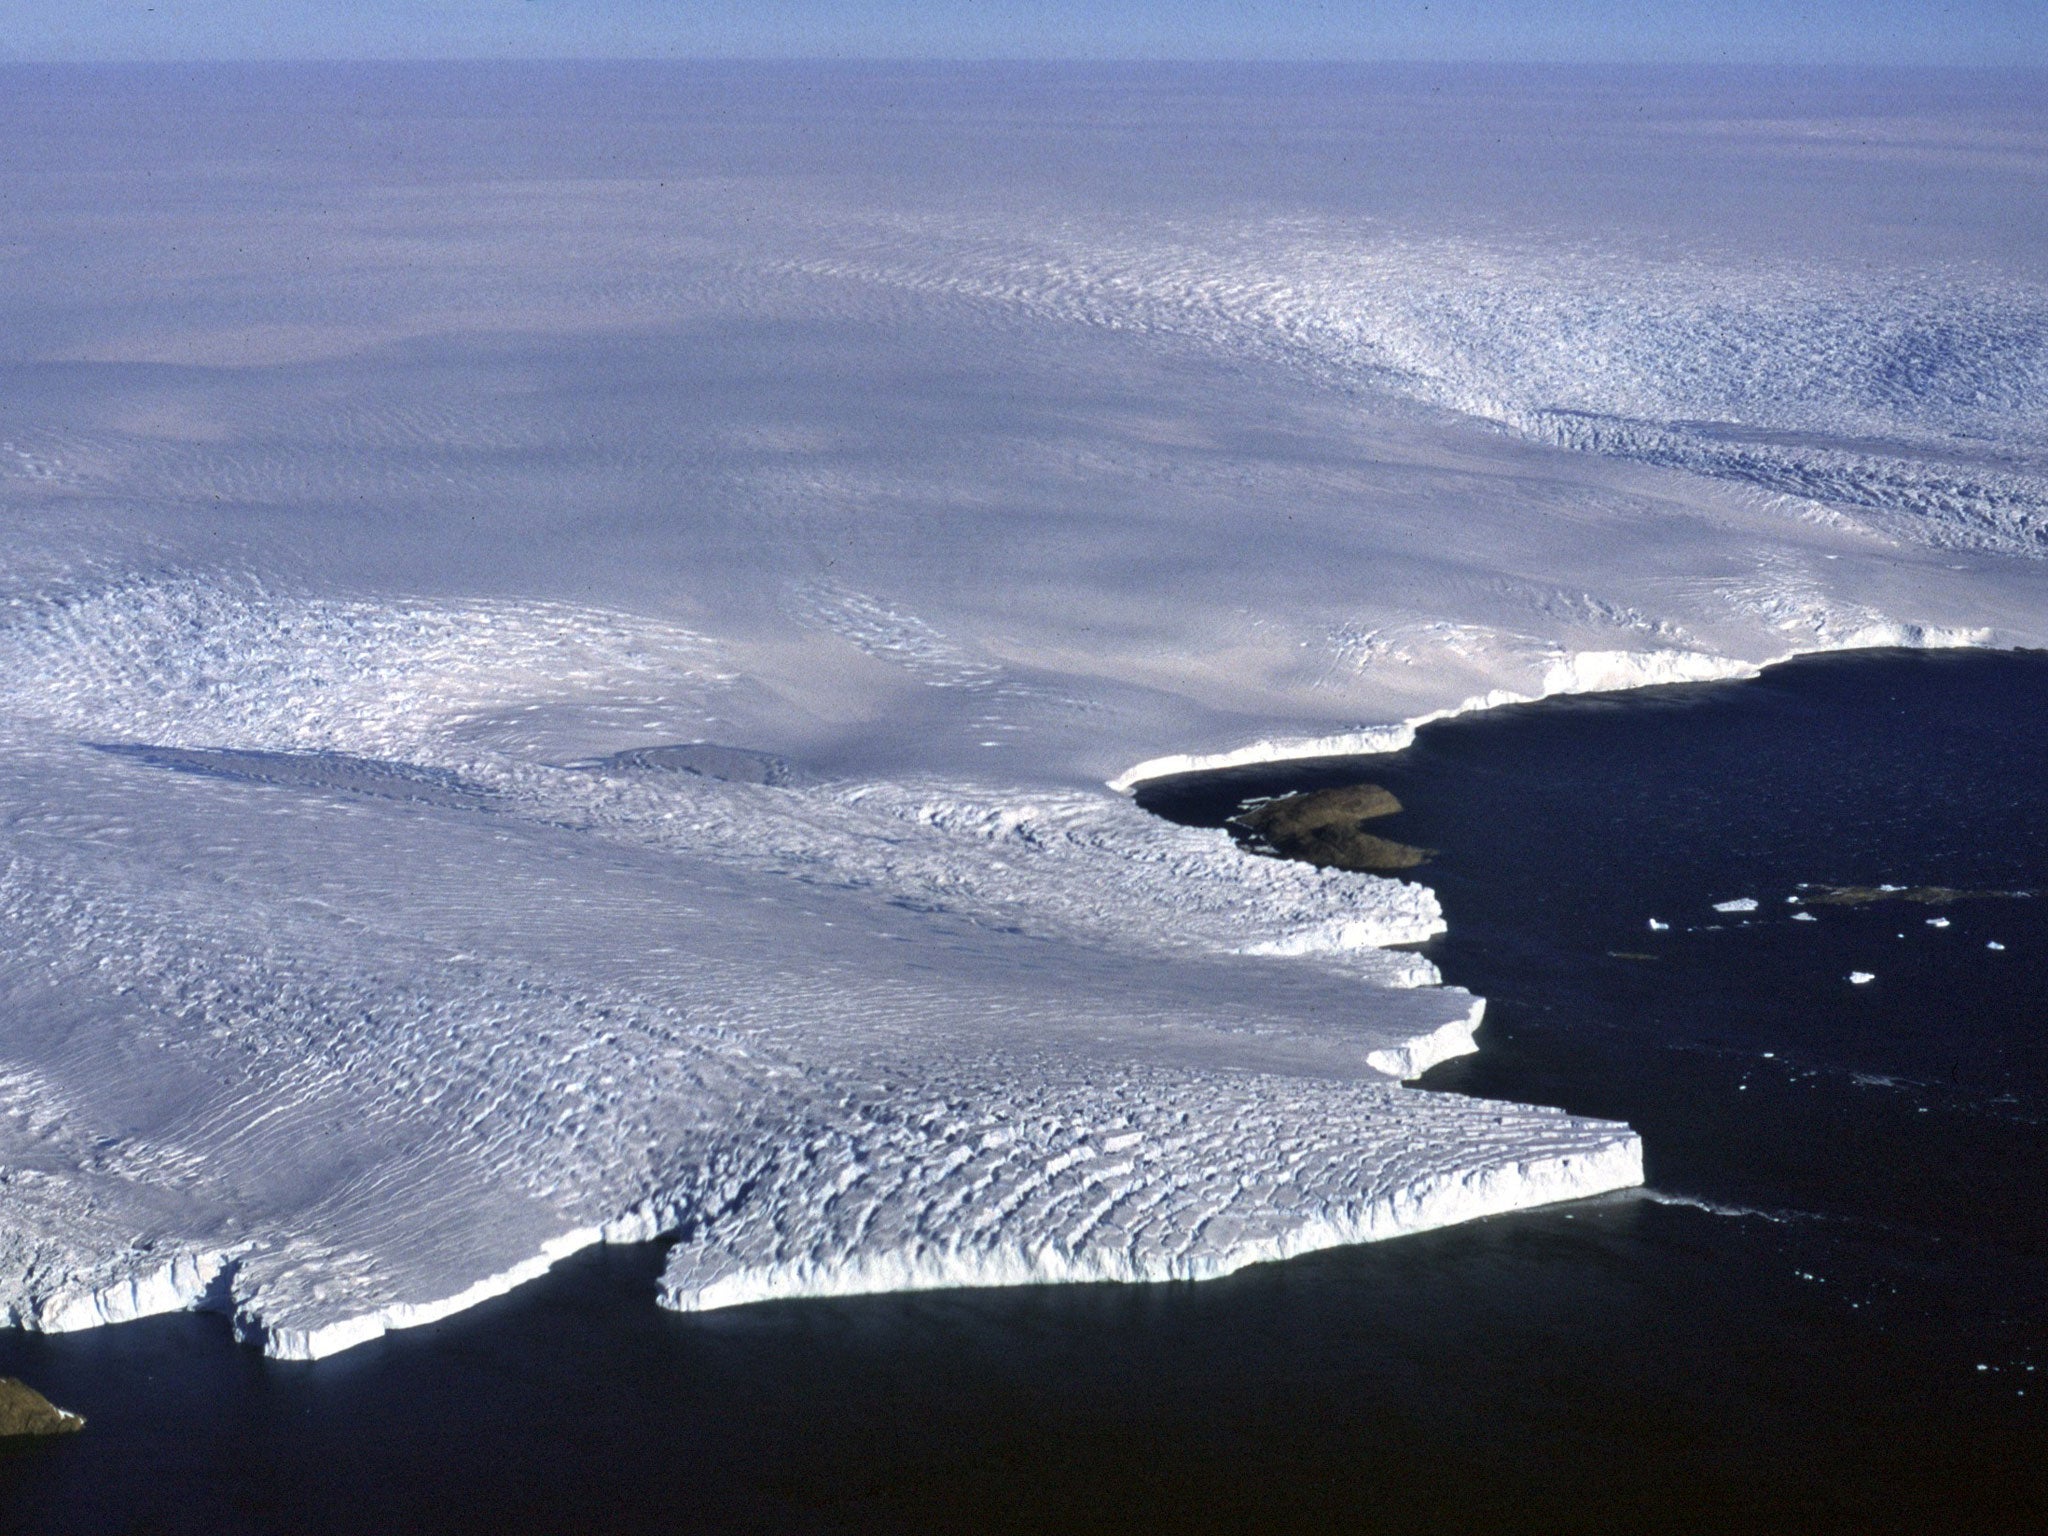 East Antarctic outlet glacier, Wilkes Land. The advance and retreat of this glacier was measured in the study and linked to variations in climate